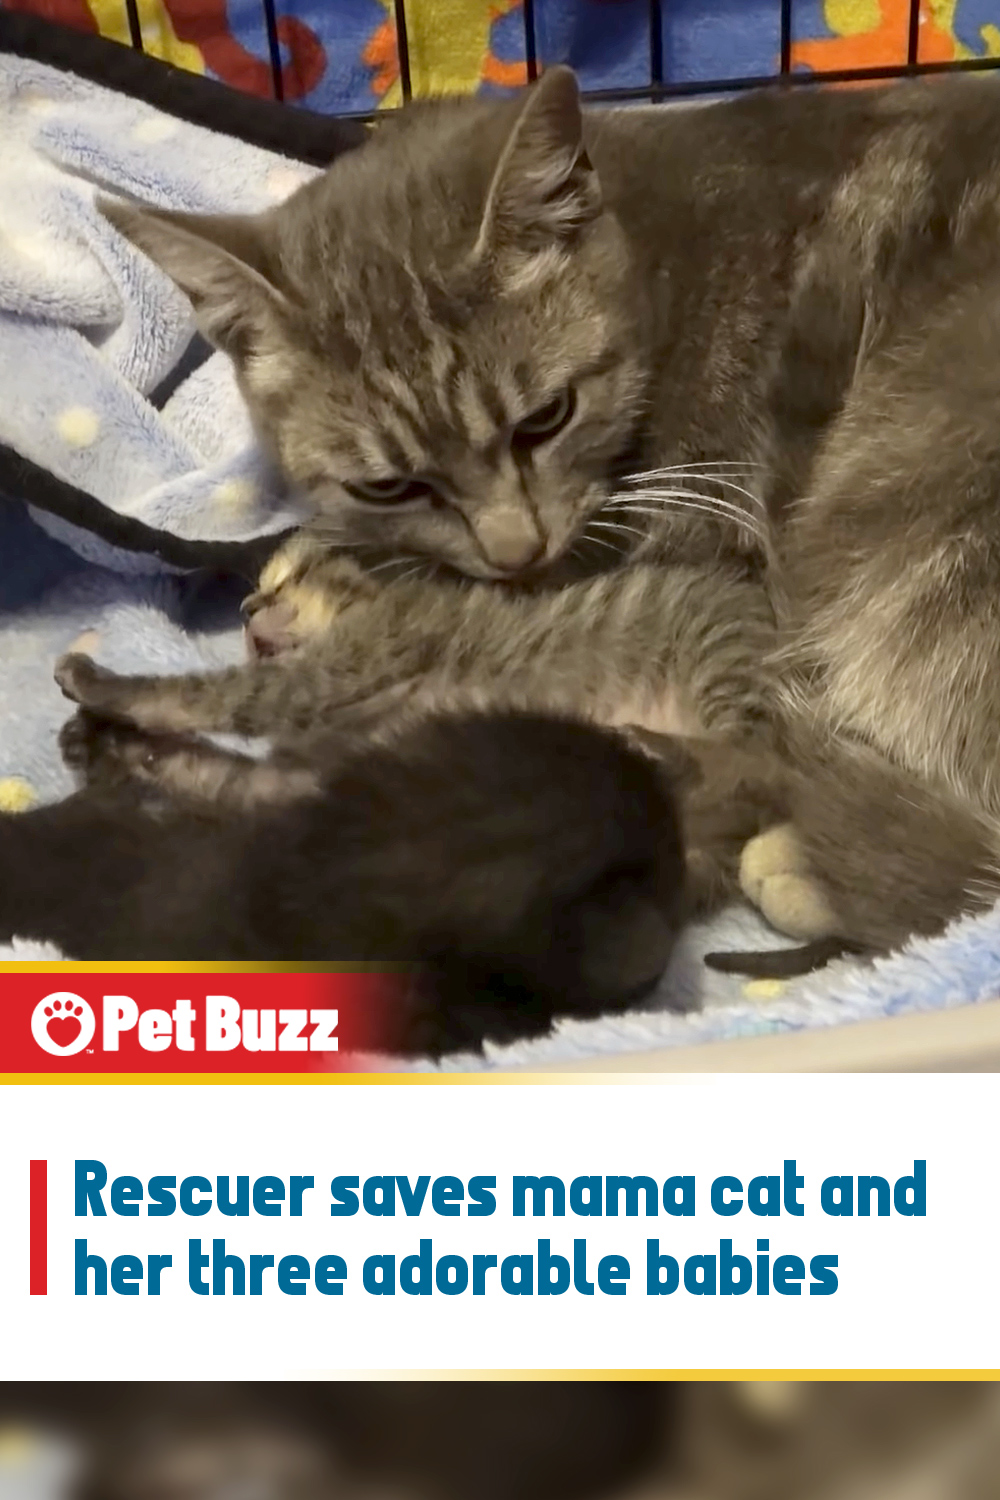 Rescuer saves mama cat and her three adorable babies